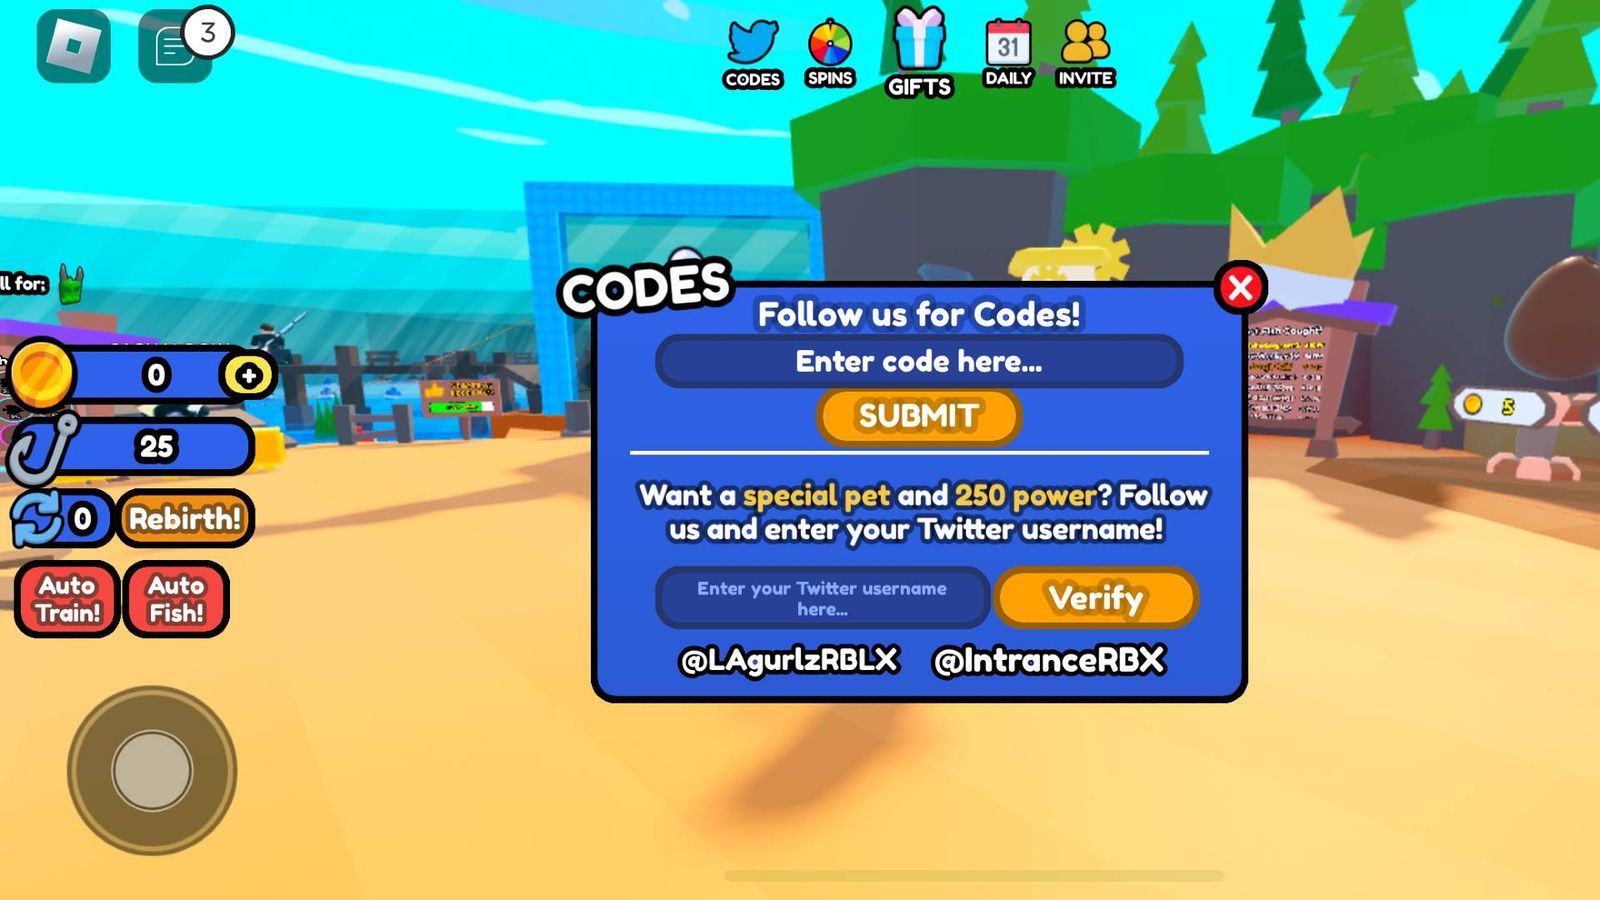 The code redemption screen in Fishing Frenzy Simulator.